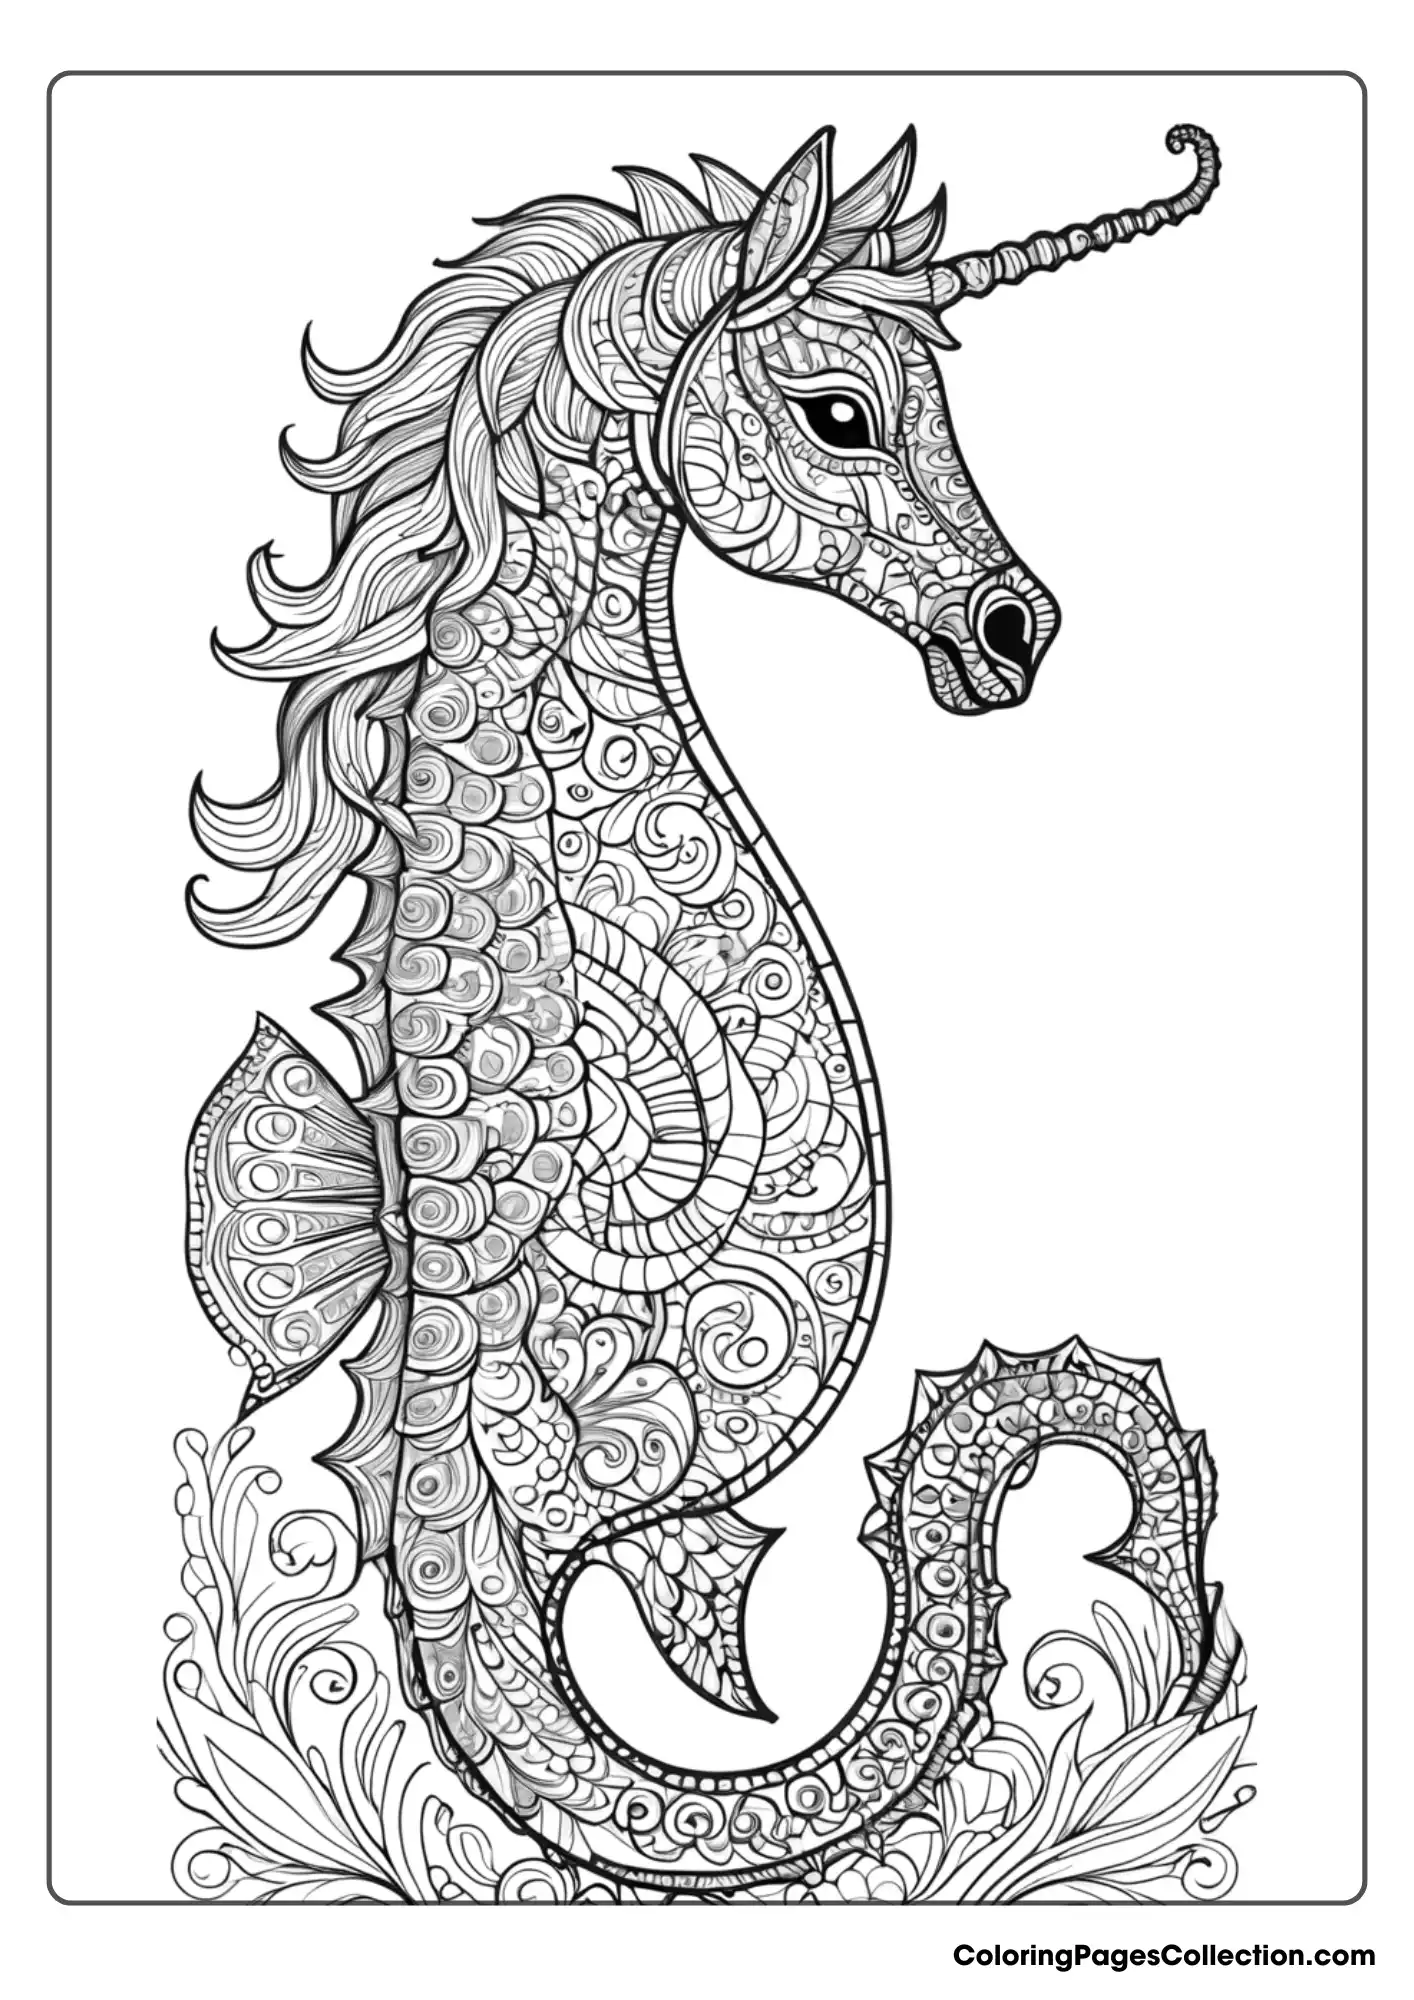 Coloring pages for teens, Unique Seahorse